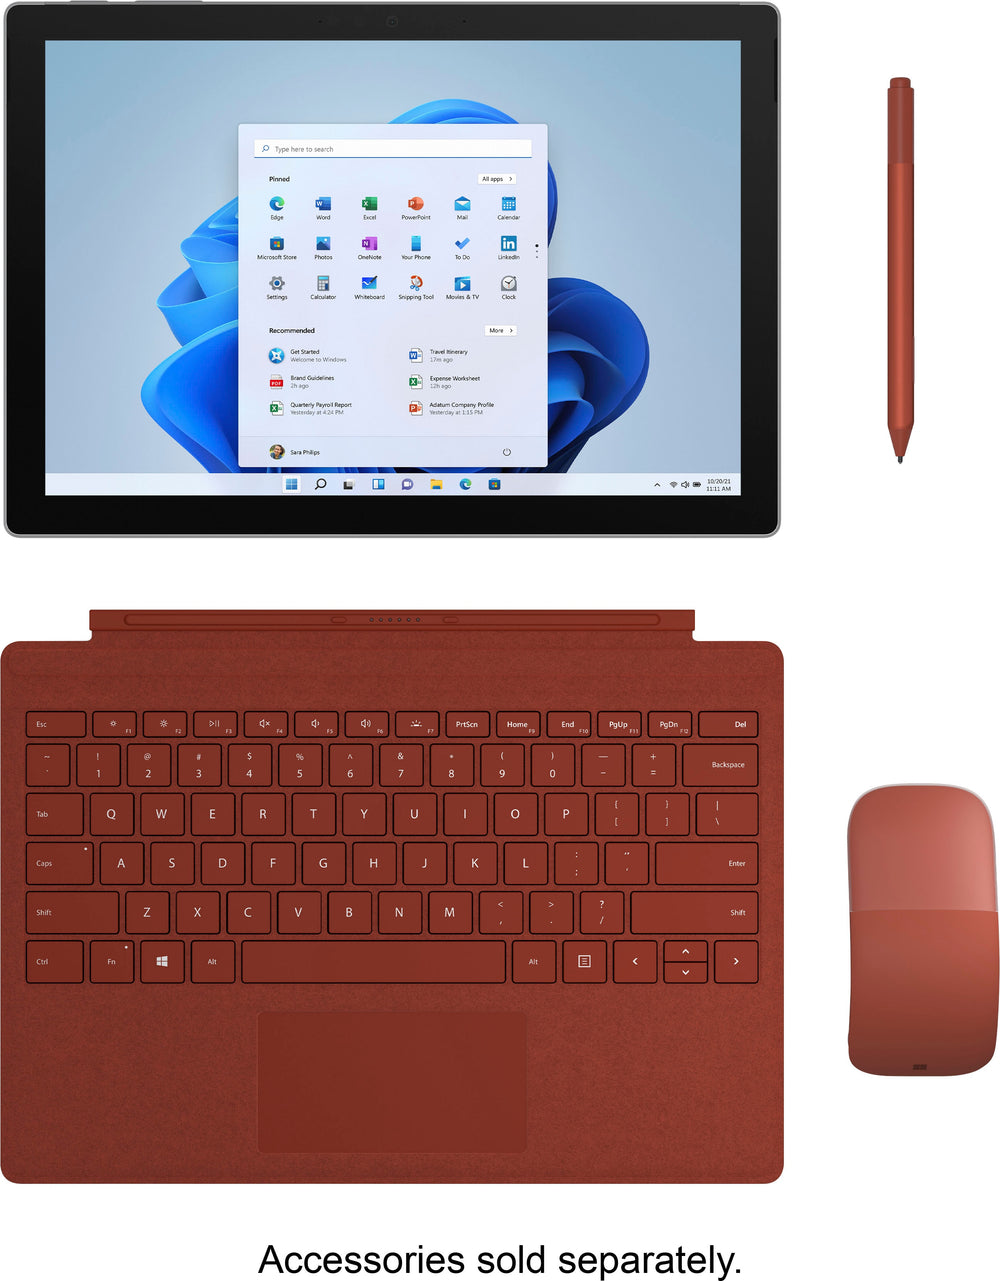 Microsoft - Surface Pro 7 - 12.3" Touch Screen - Intel Core i7 - 16GB Memory - 256GB SSD - Device Only (Latest Model) - Platinum_1